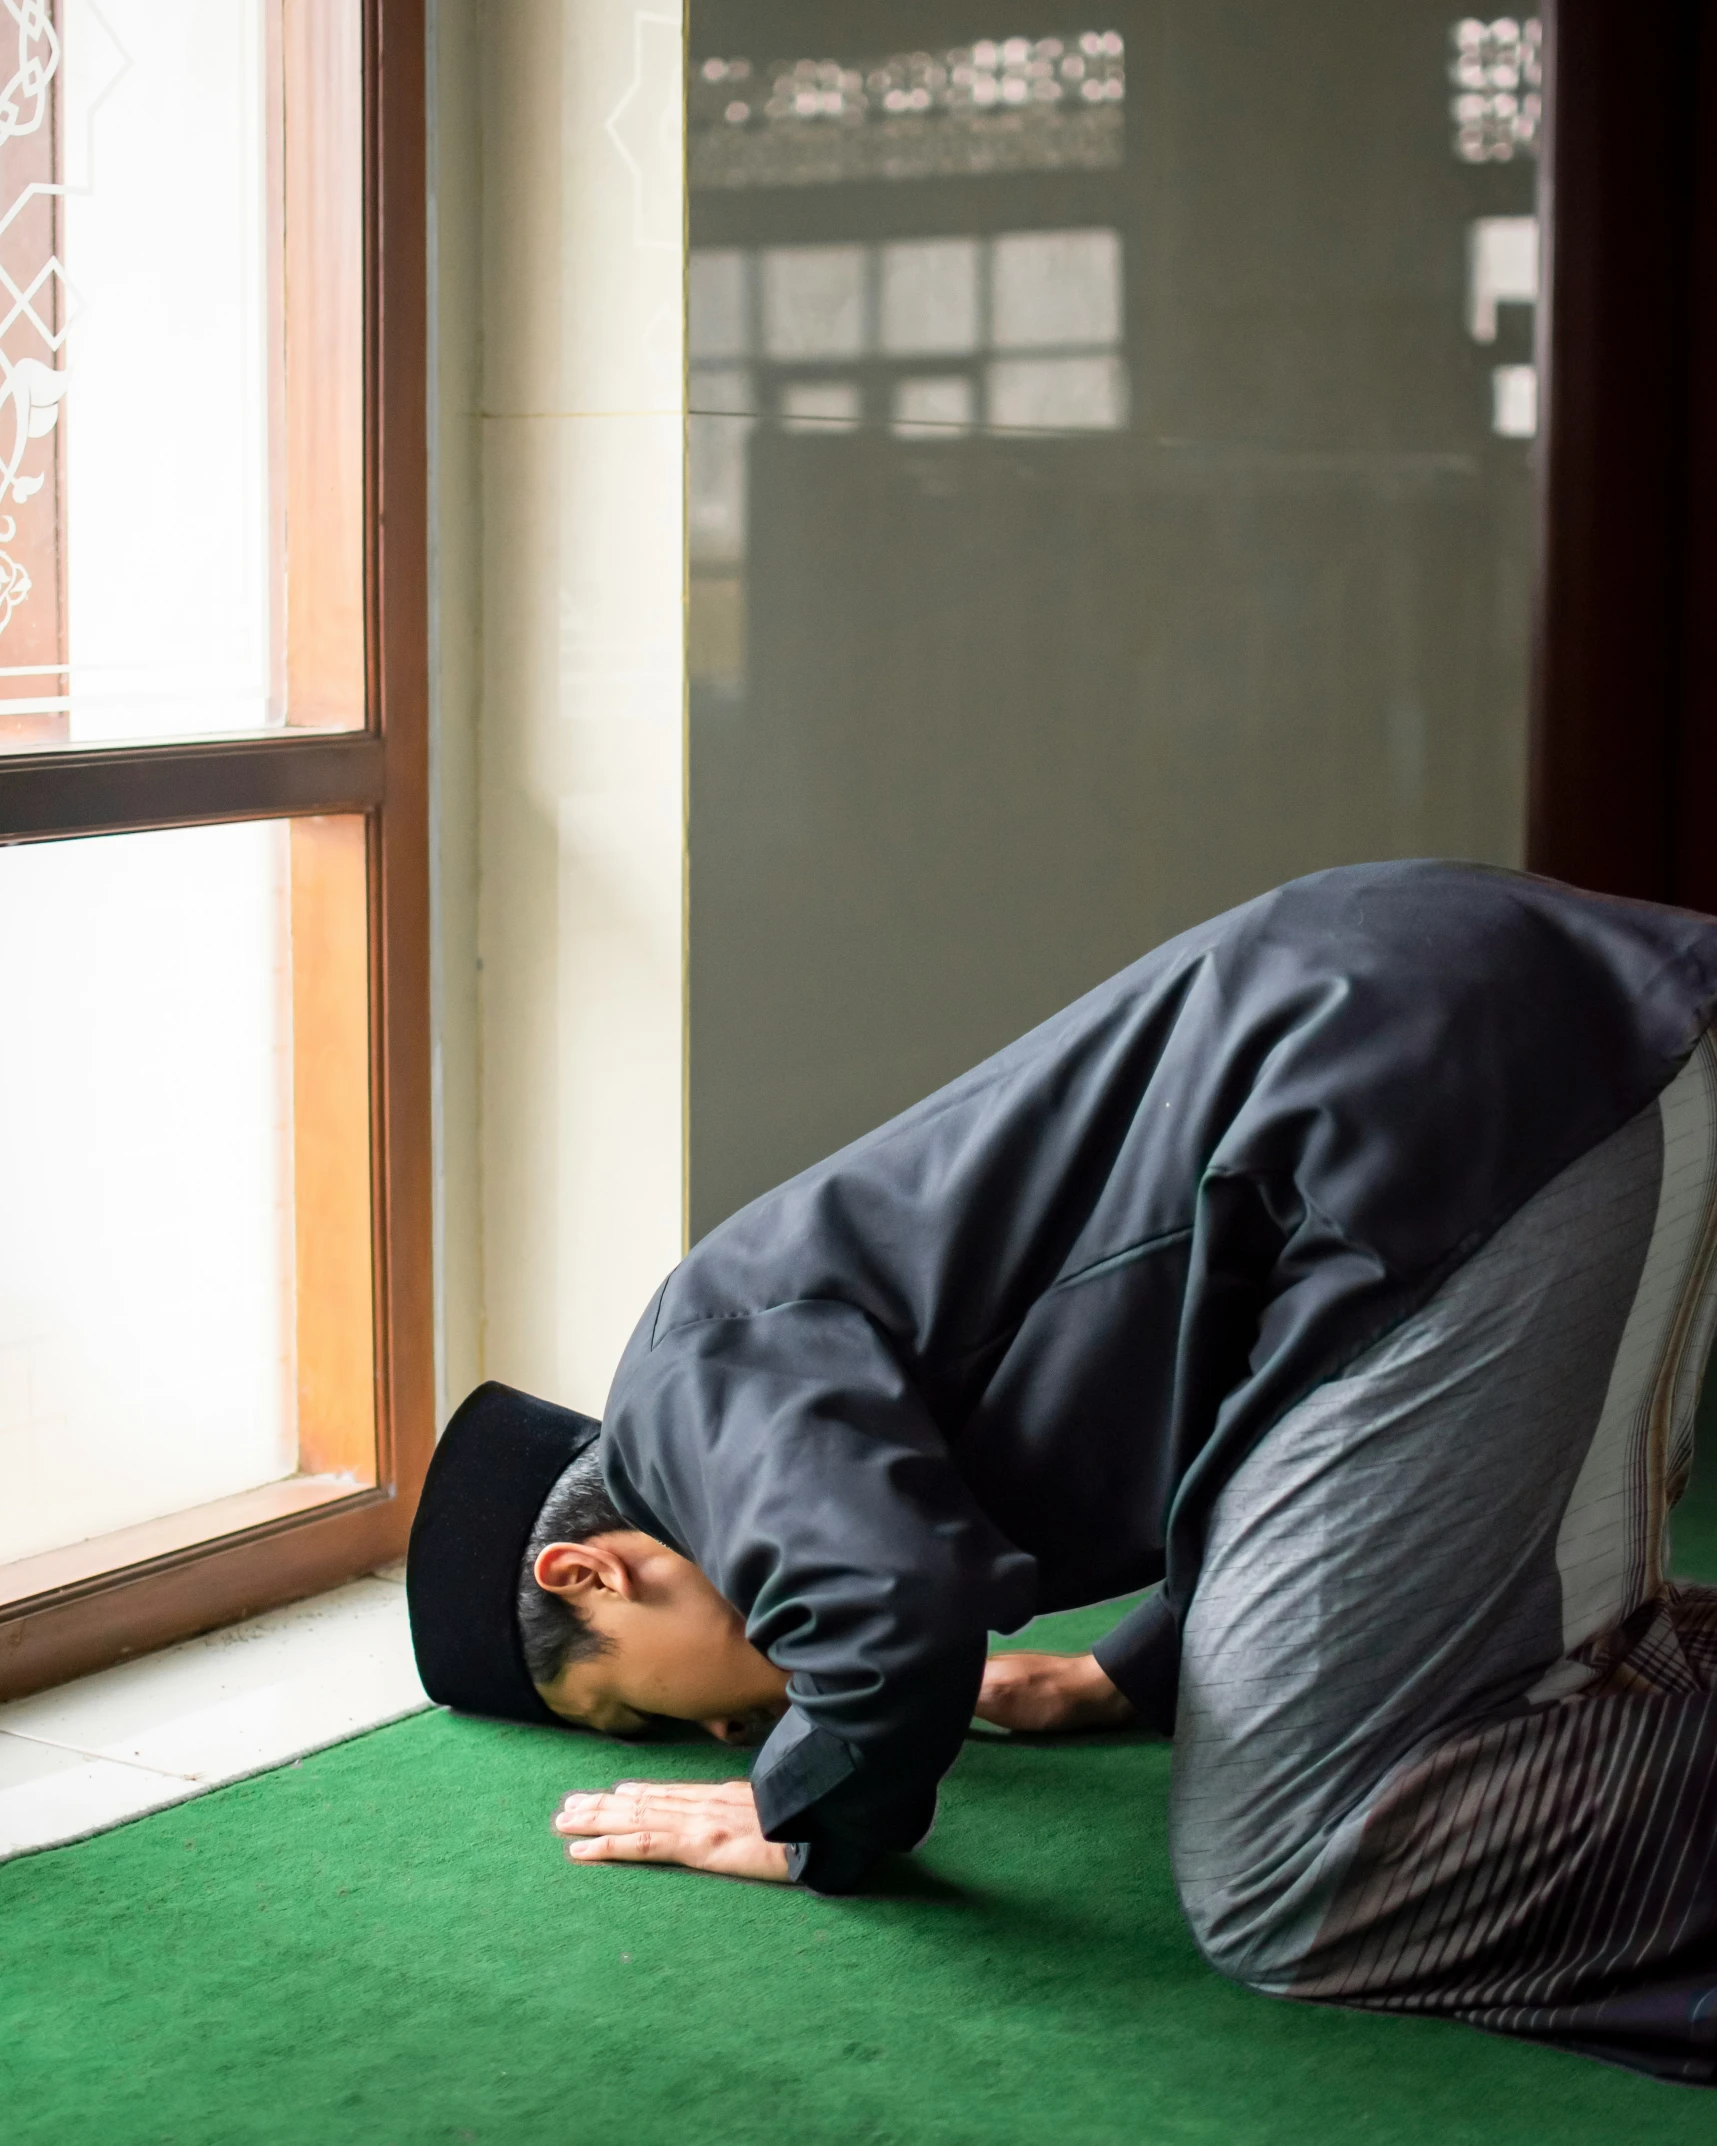 a man dressed in black standing on his knees and looking at his head on the ground